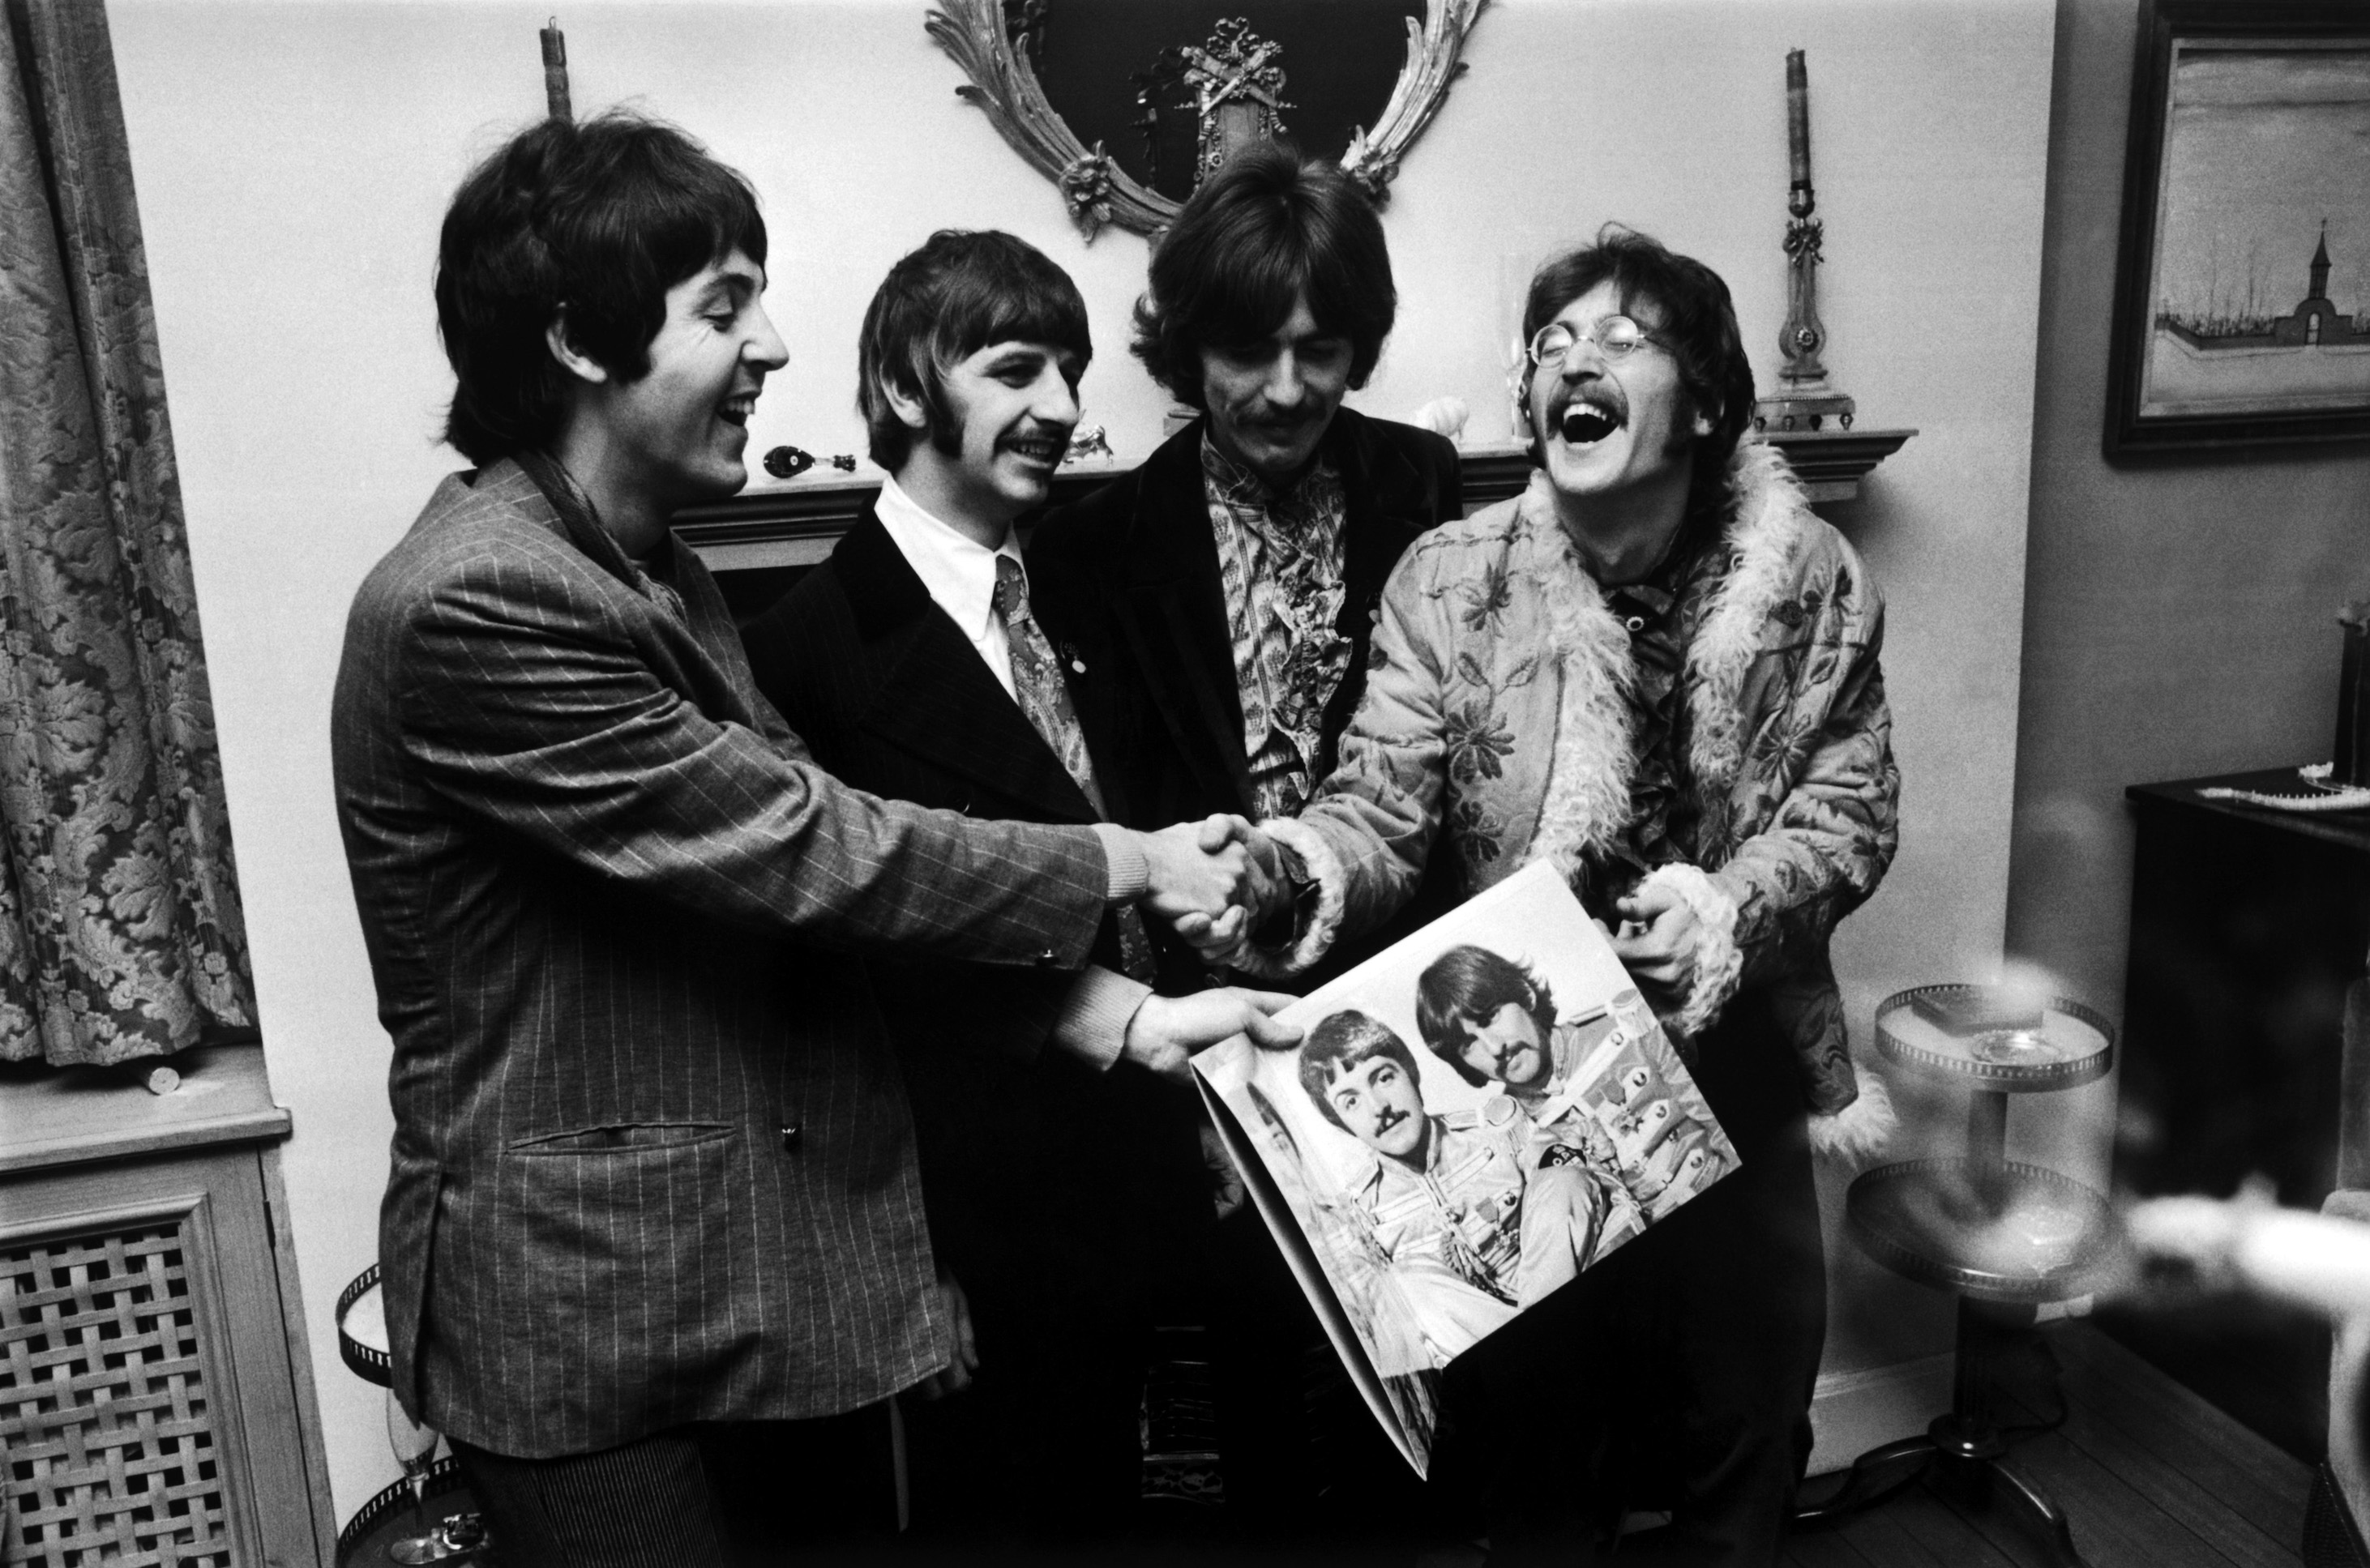 The Beatles attend the press launch for their album Sgt. Pepper's Lonely Hearts Club Band